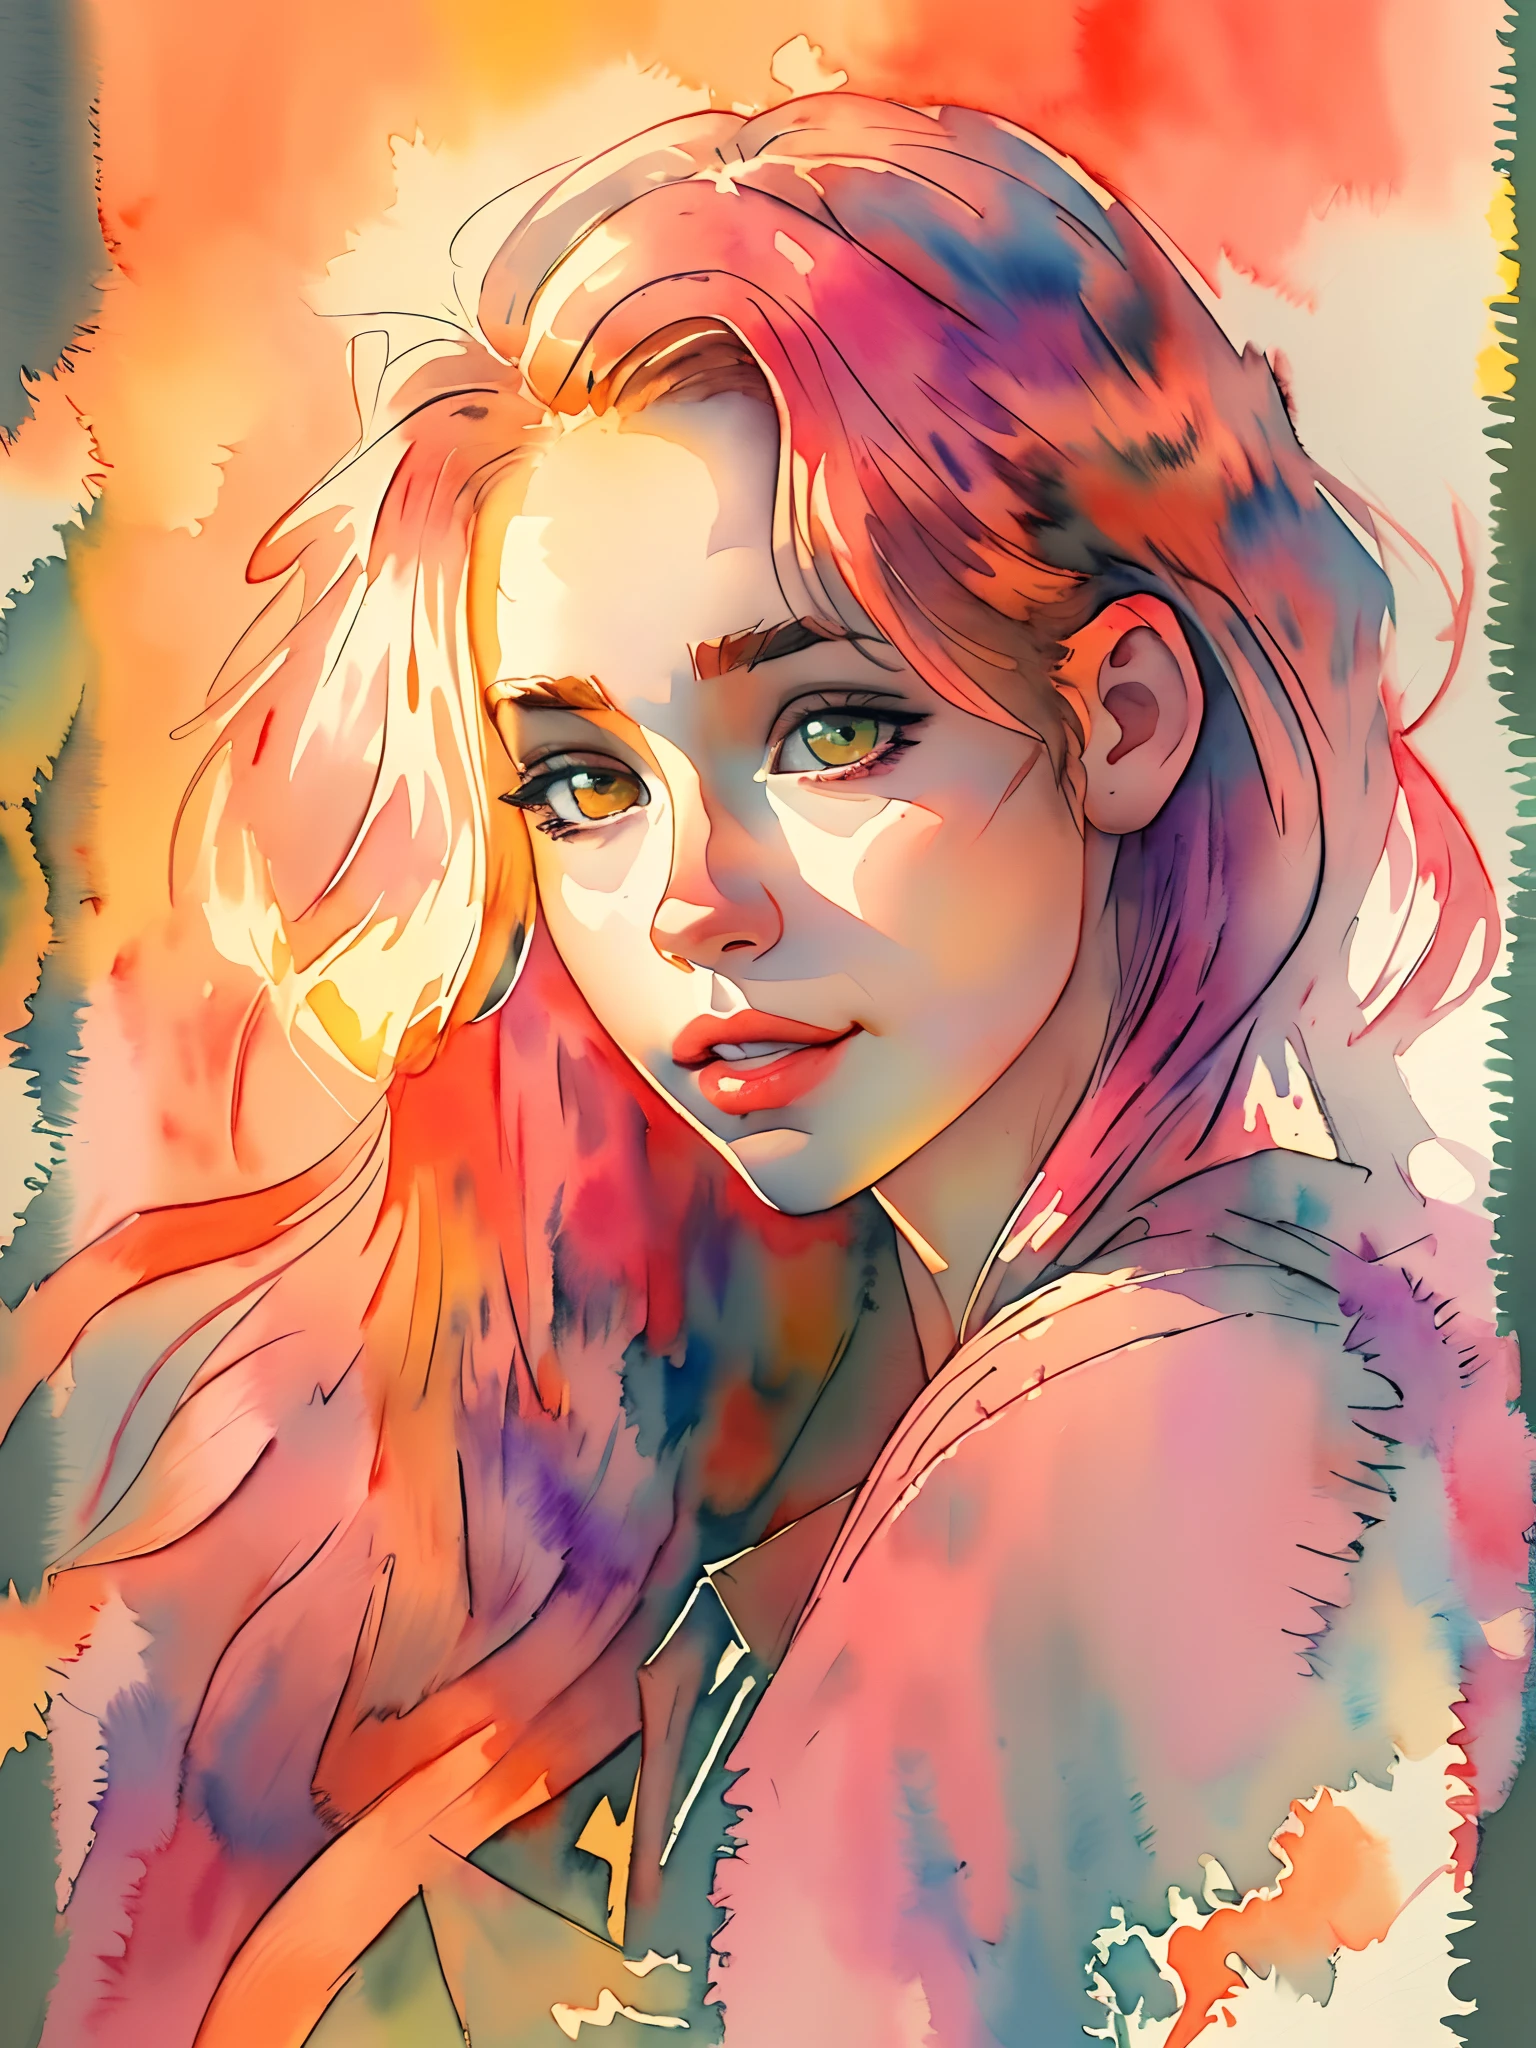 (16k, masterpiece:1.2),(best quality:1.5), (ultra highres:1.0), watercolor, a beautiful woman, 25-years-old, shoulder, hair ribbons, half body portrait, extremely luminous bright design, pastel colors, (ink:1.3), autumn lights, orange aura